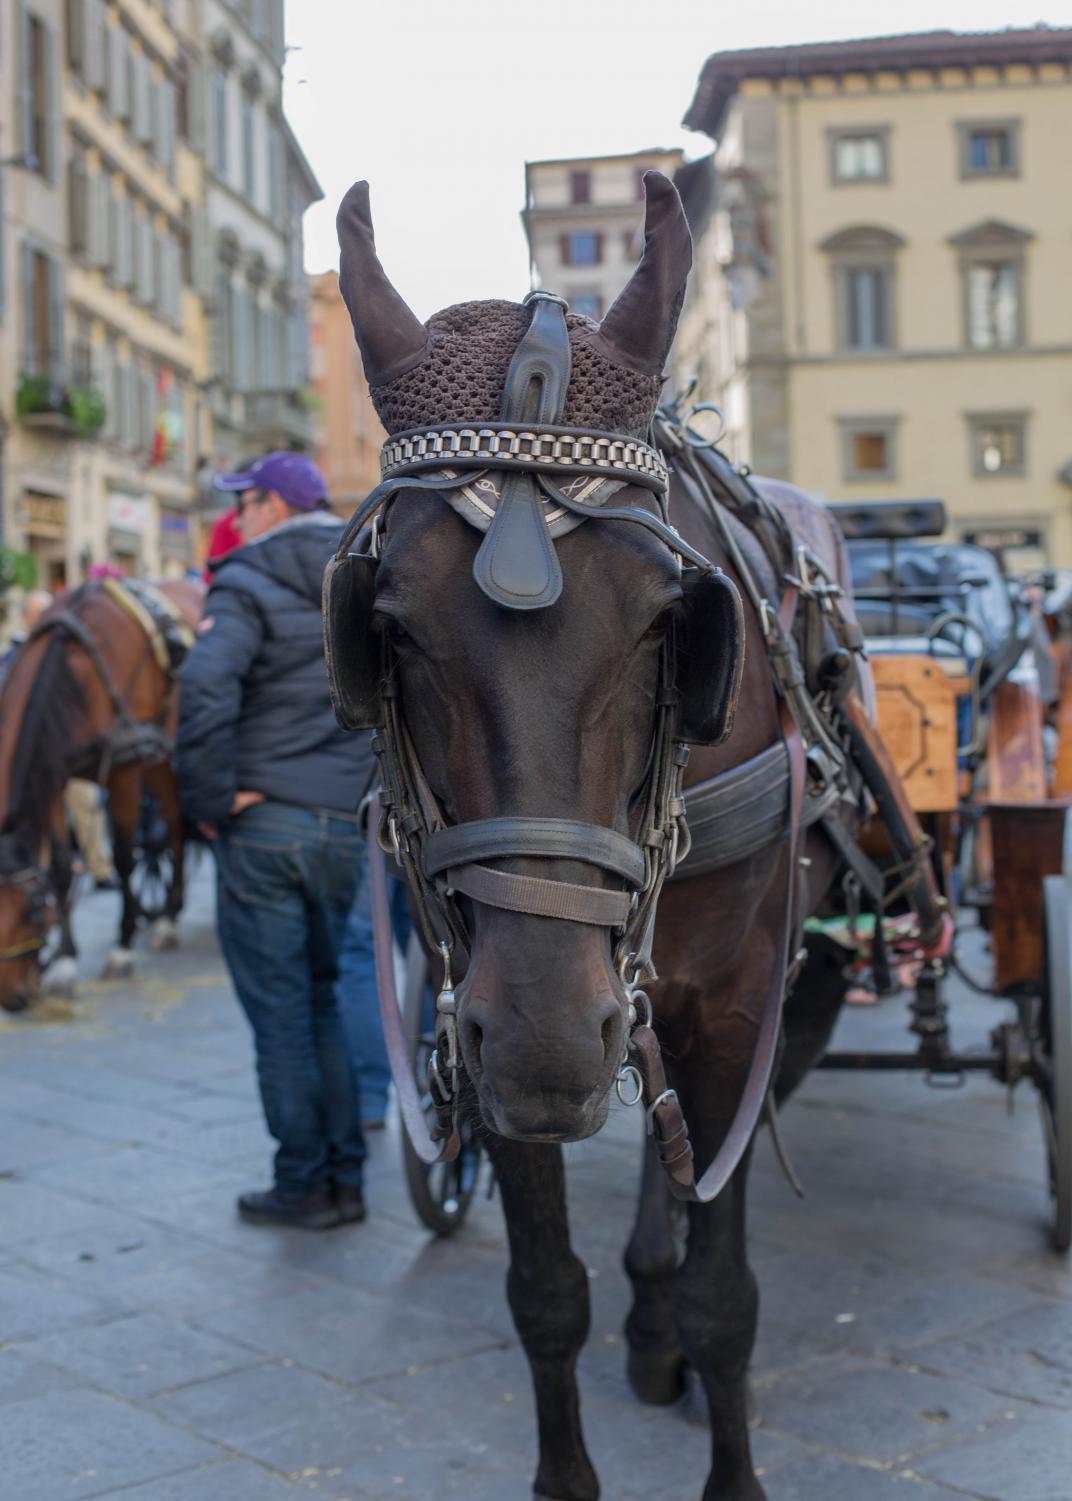 Exposure+%7C+Troubles+of+Tourism%3A+Cruelty+of+Exploiting+Horses+for+Carriage+Rides